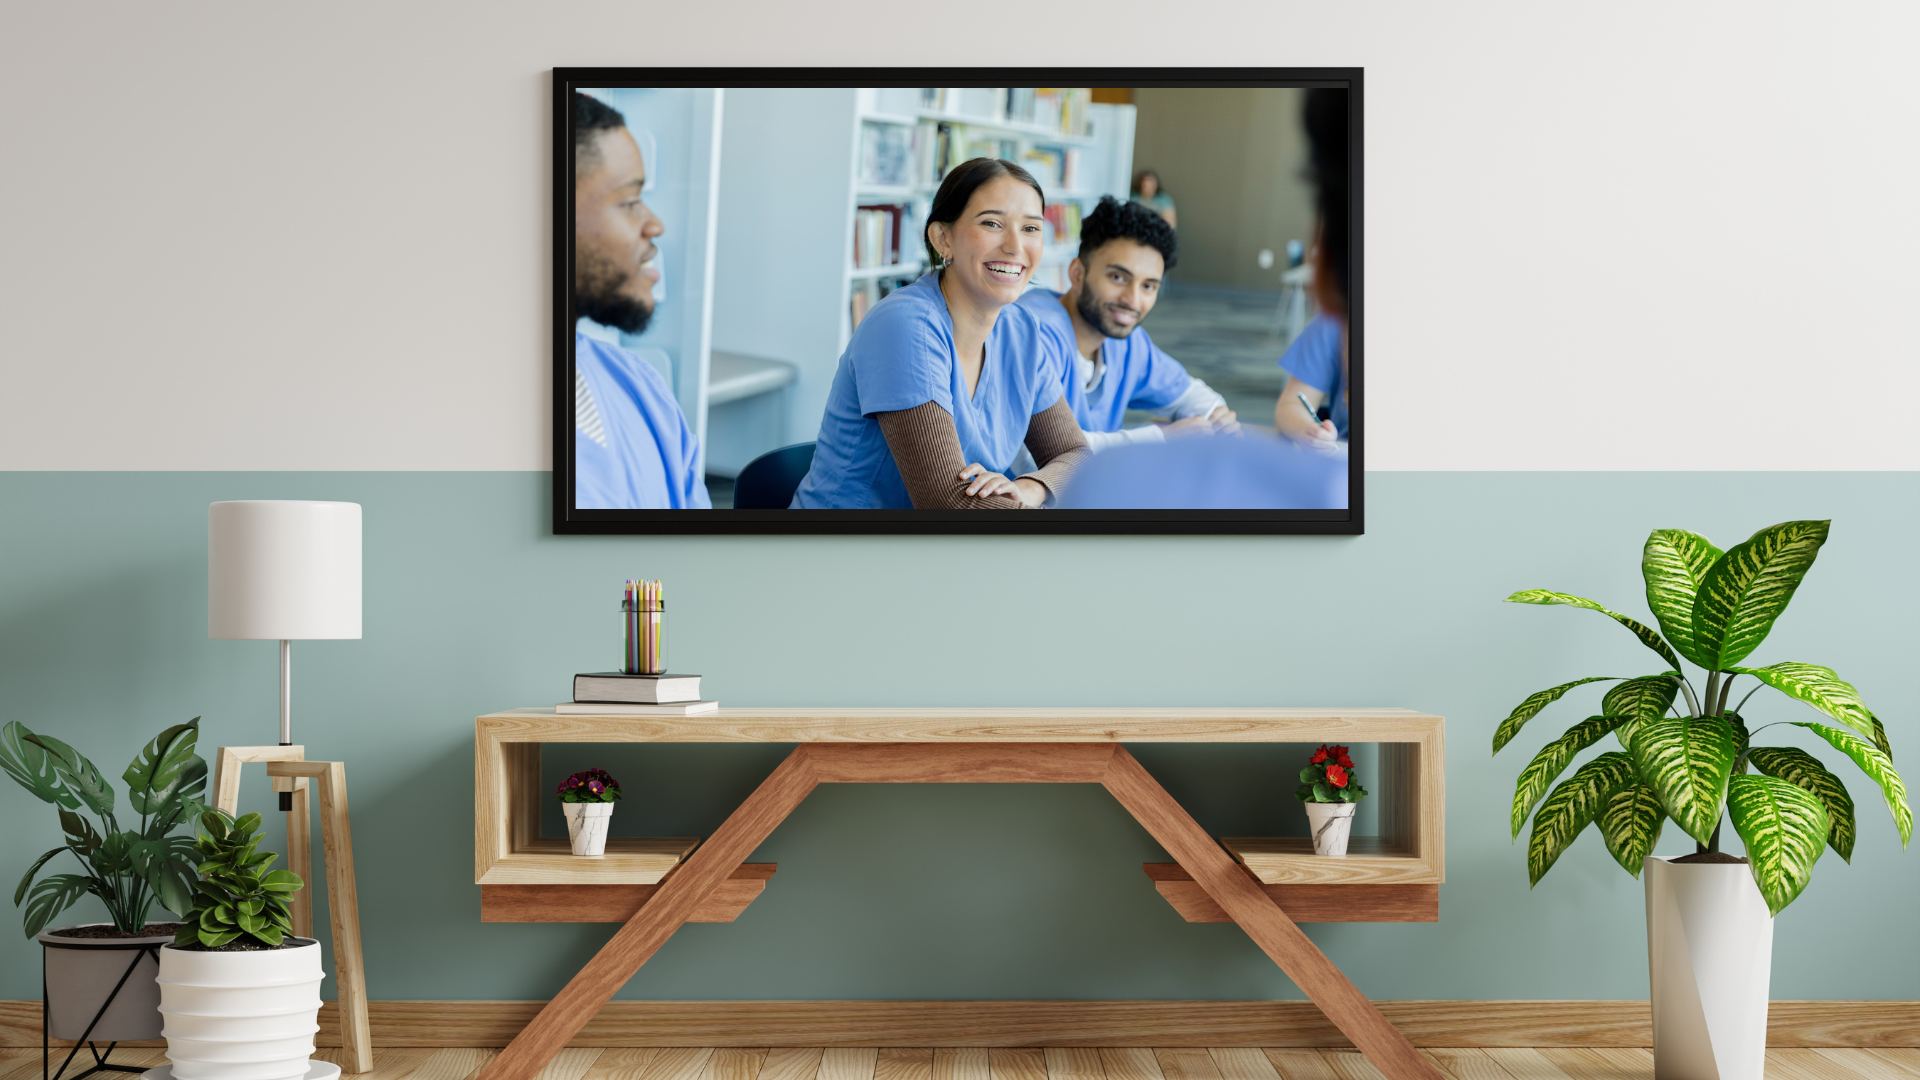 A flat-screen TV in a living room with nurses collaborating on the screen. 